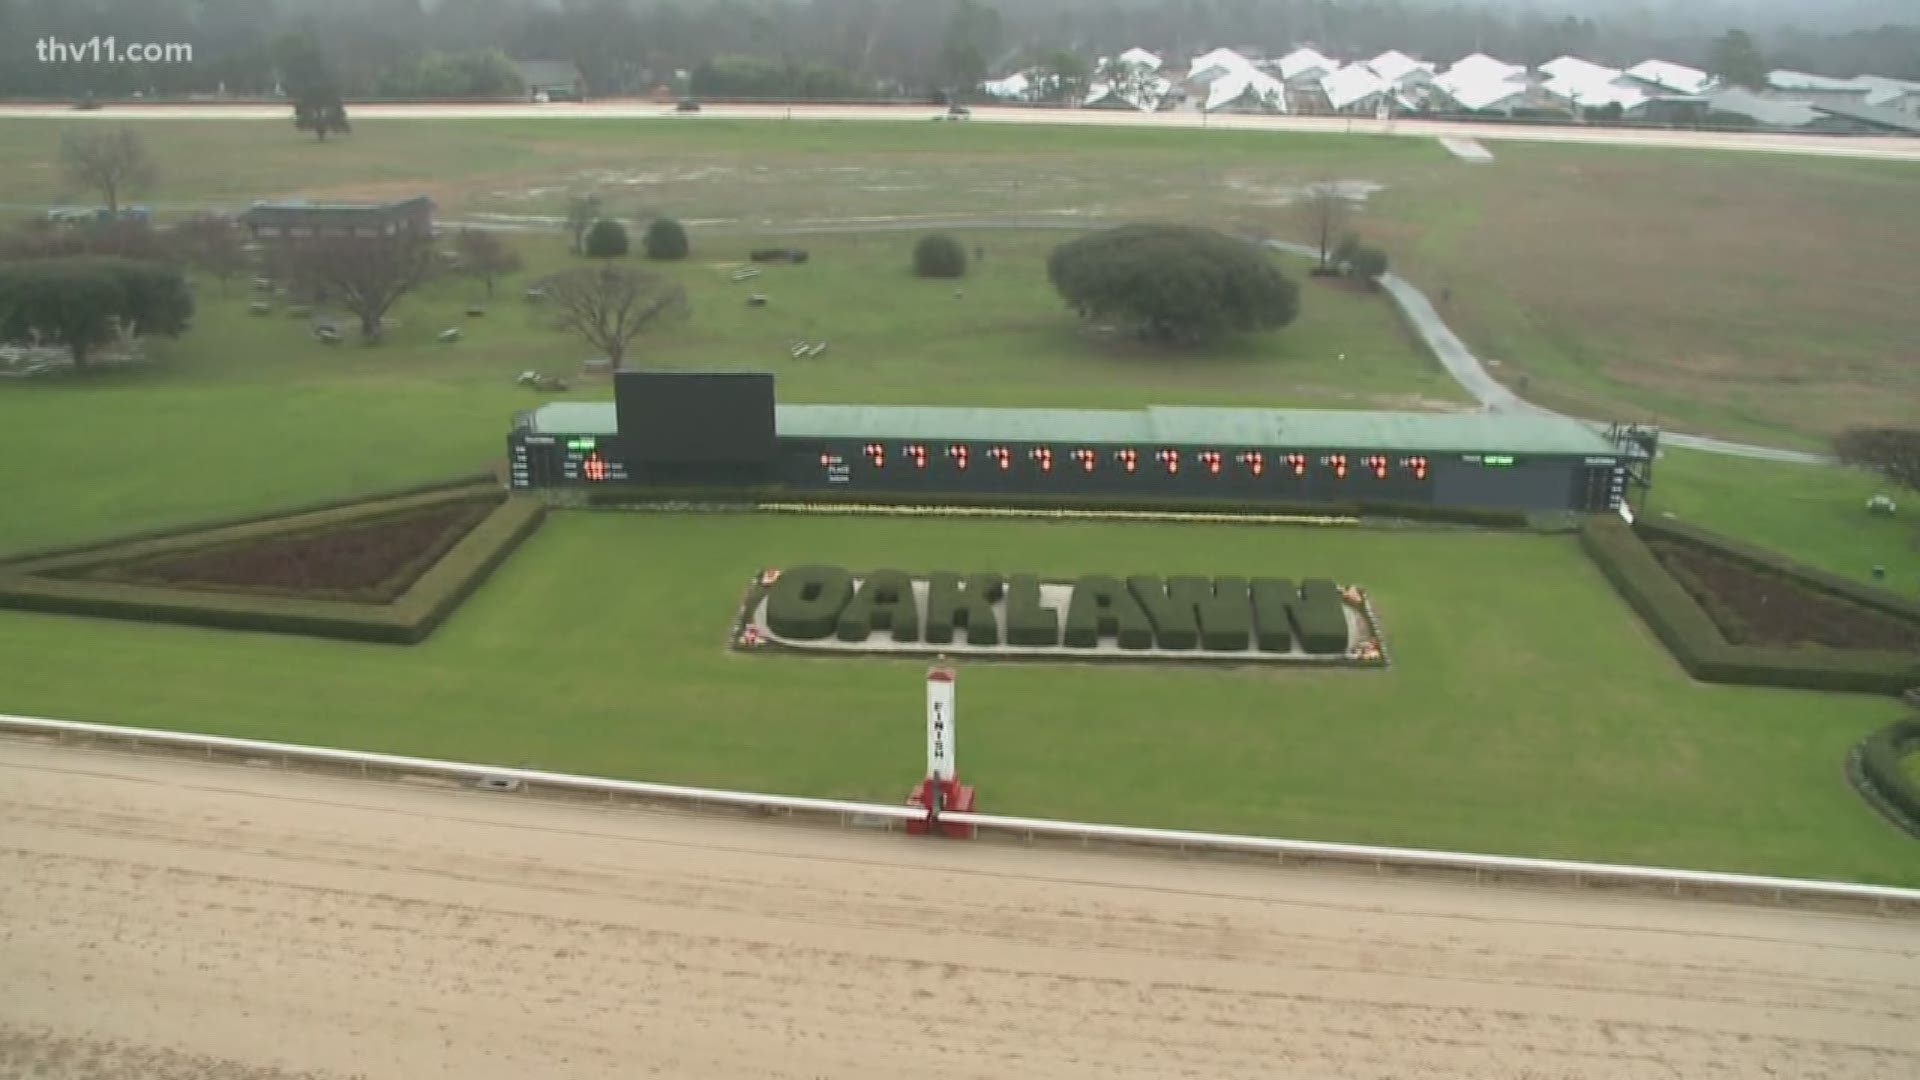 As the new hotel and resort get built, Oaklawn assures fans that the season will not miss a beat.